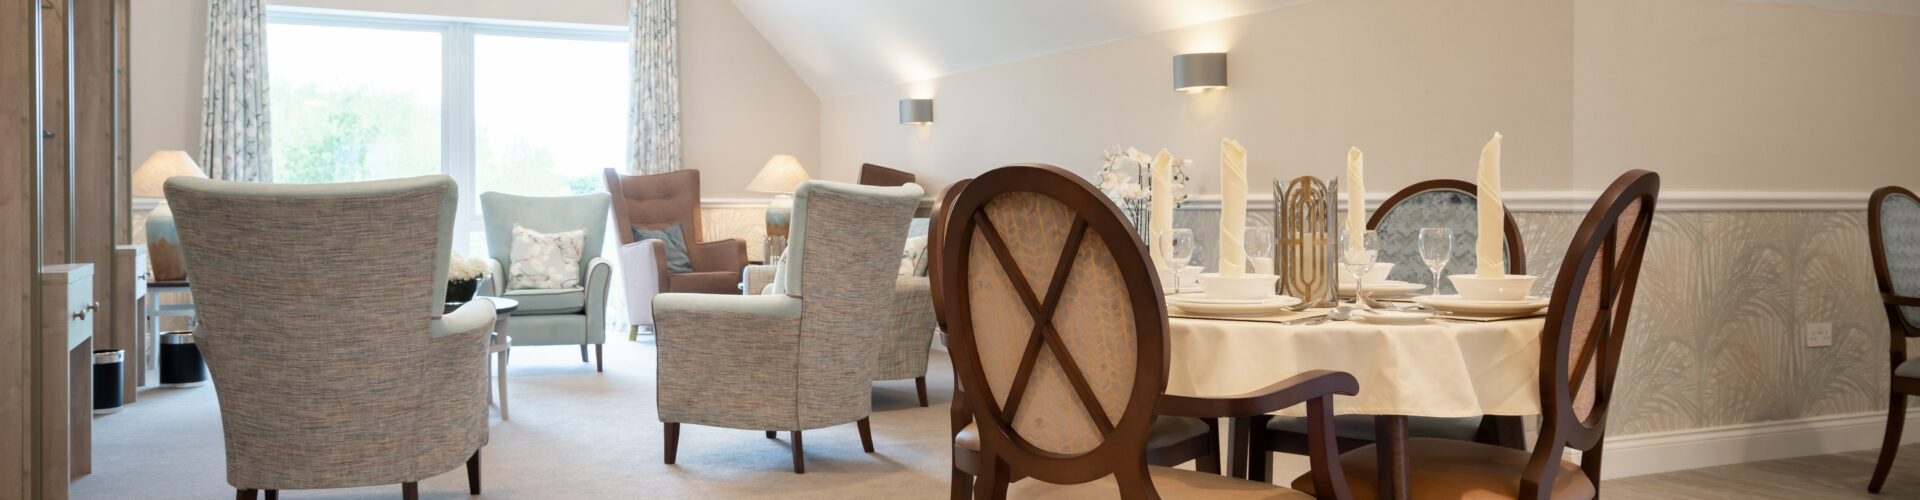 Dining room with table and chairs at Elmbrook Court Care Home in Wantage